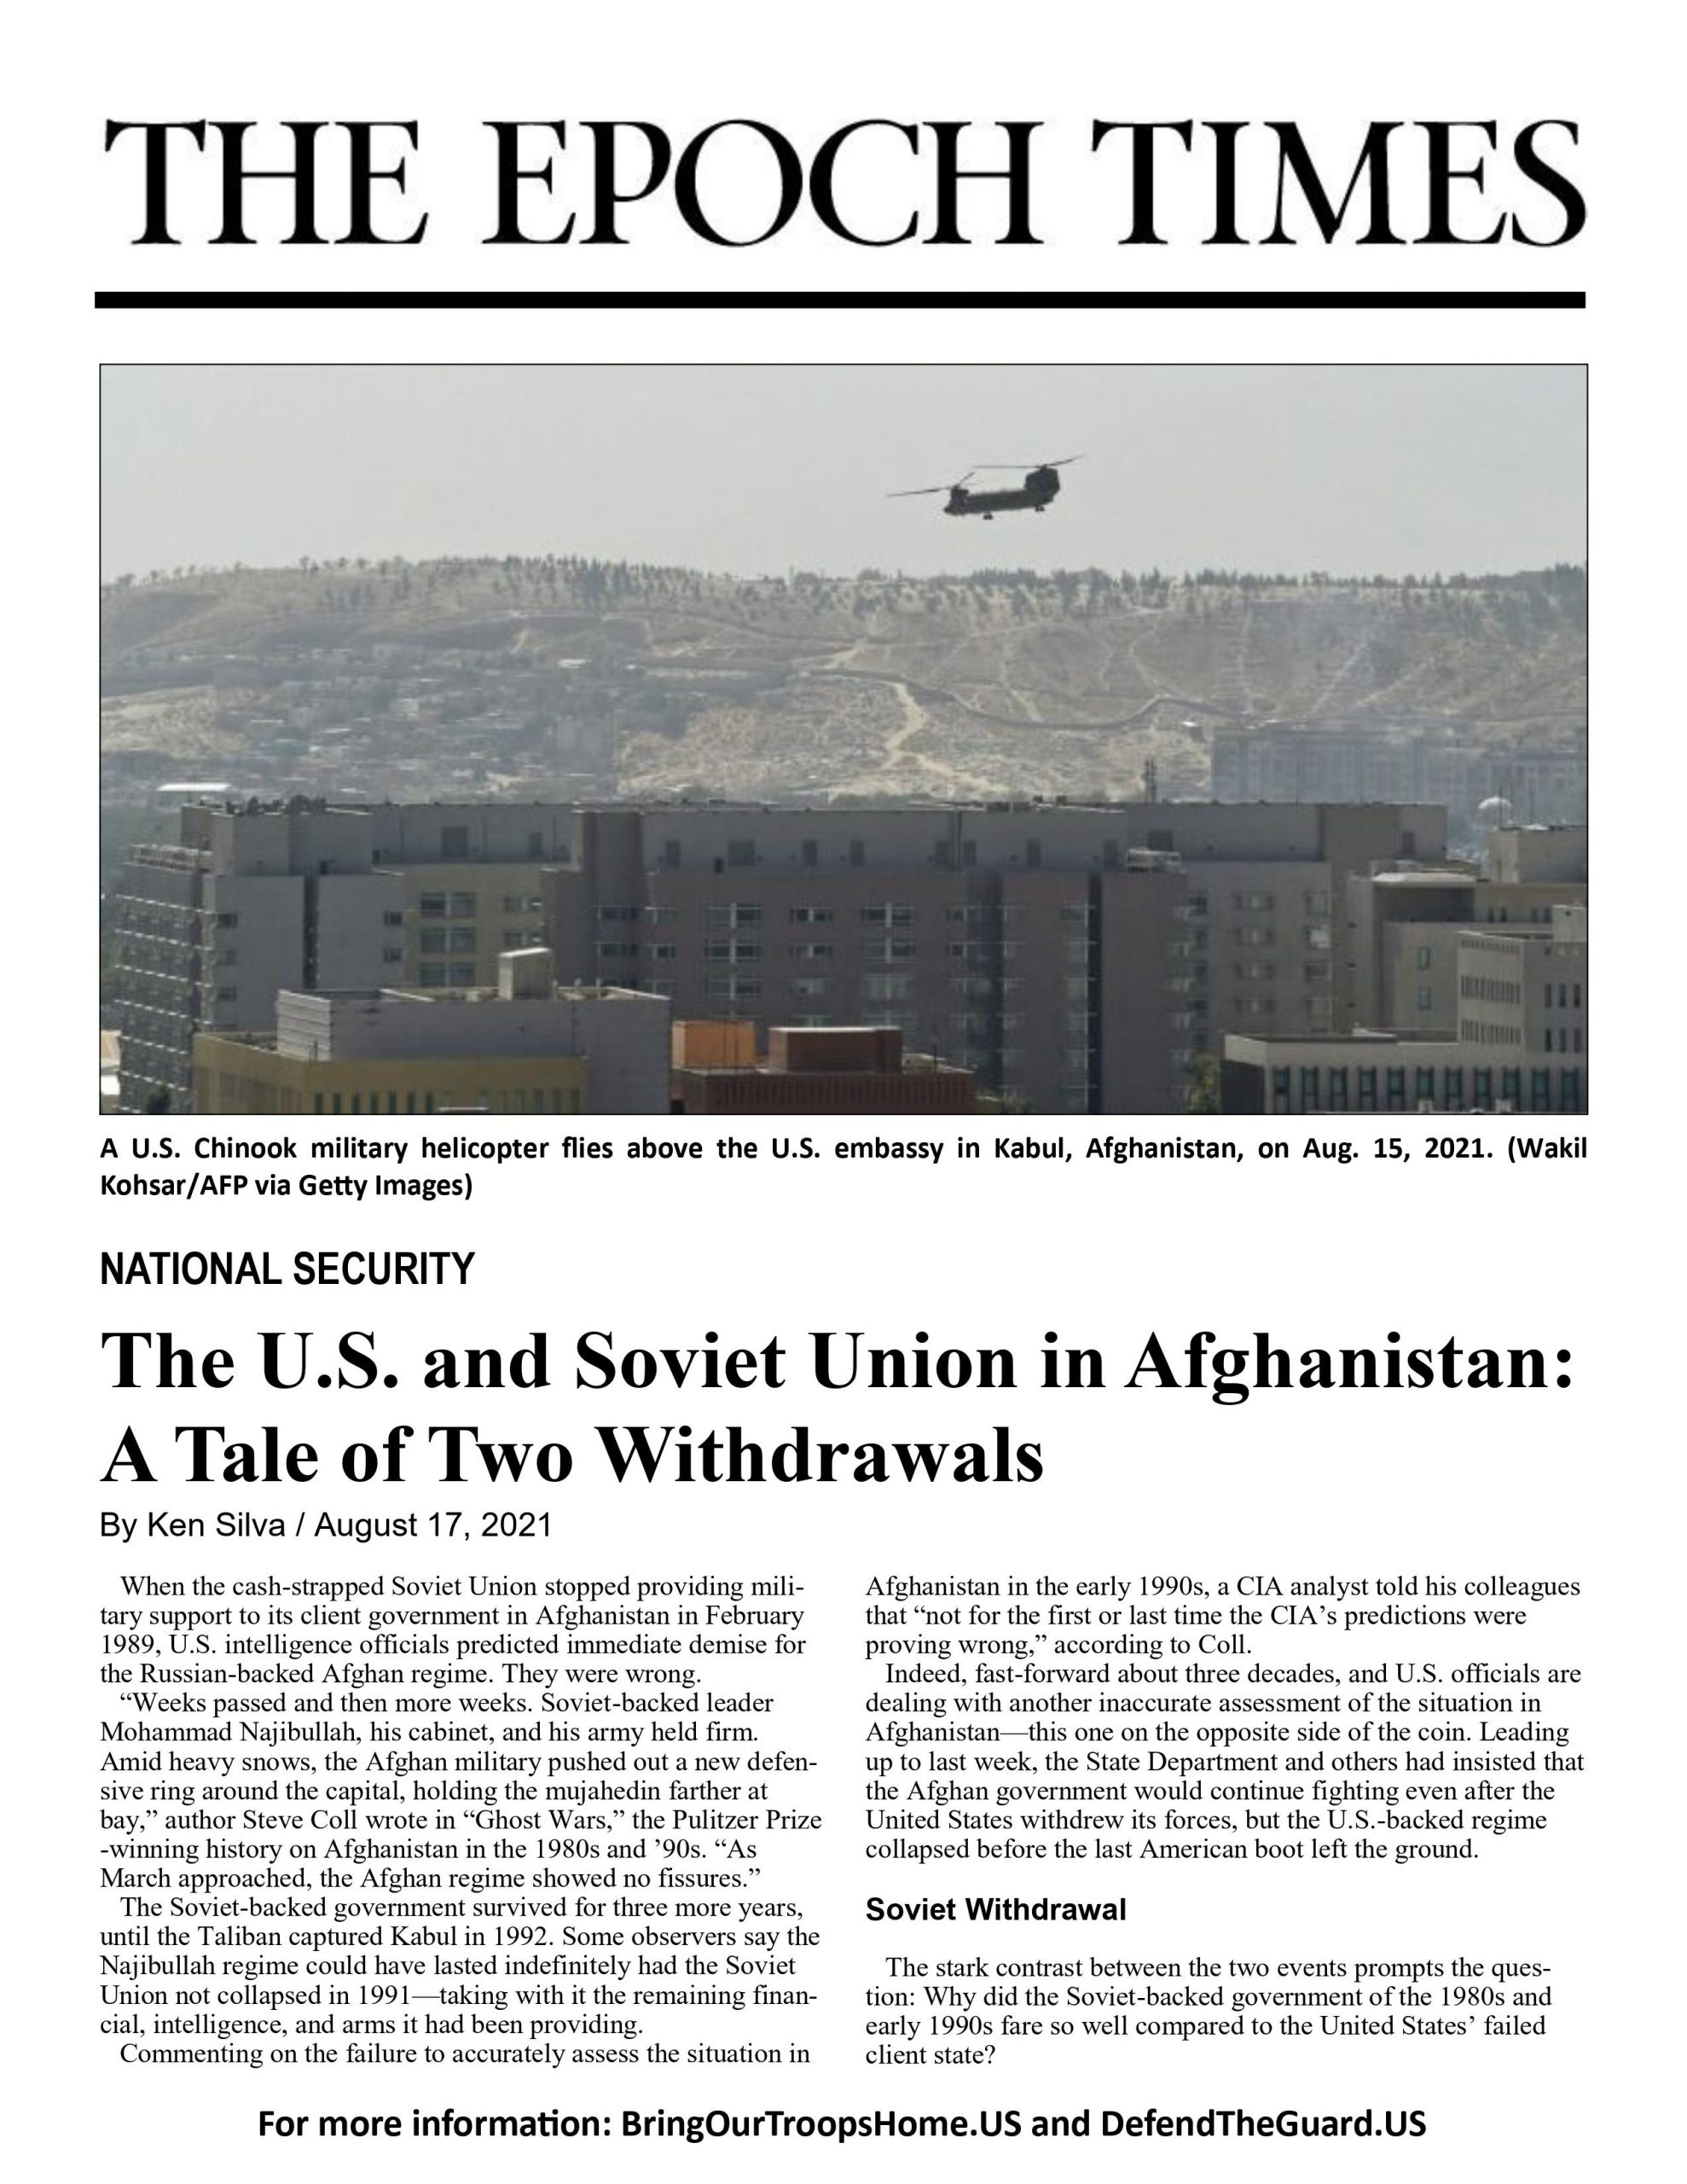 The U.S. and Soviet Union in Afghanistan: A Tale of Two Withdrawals